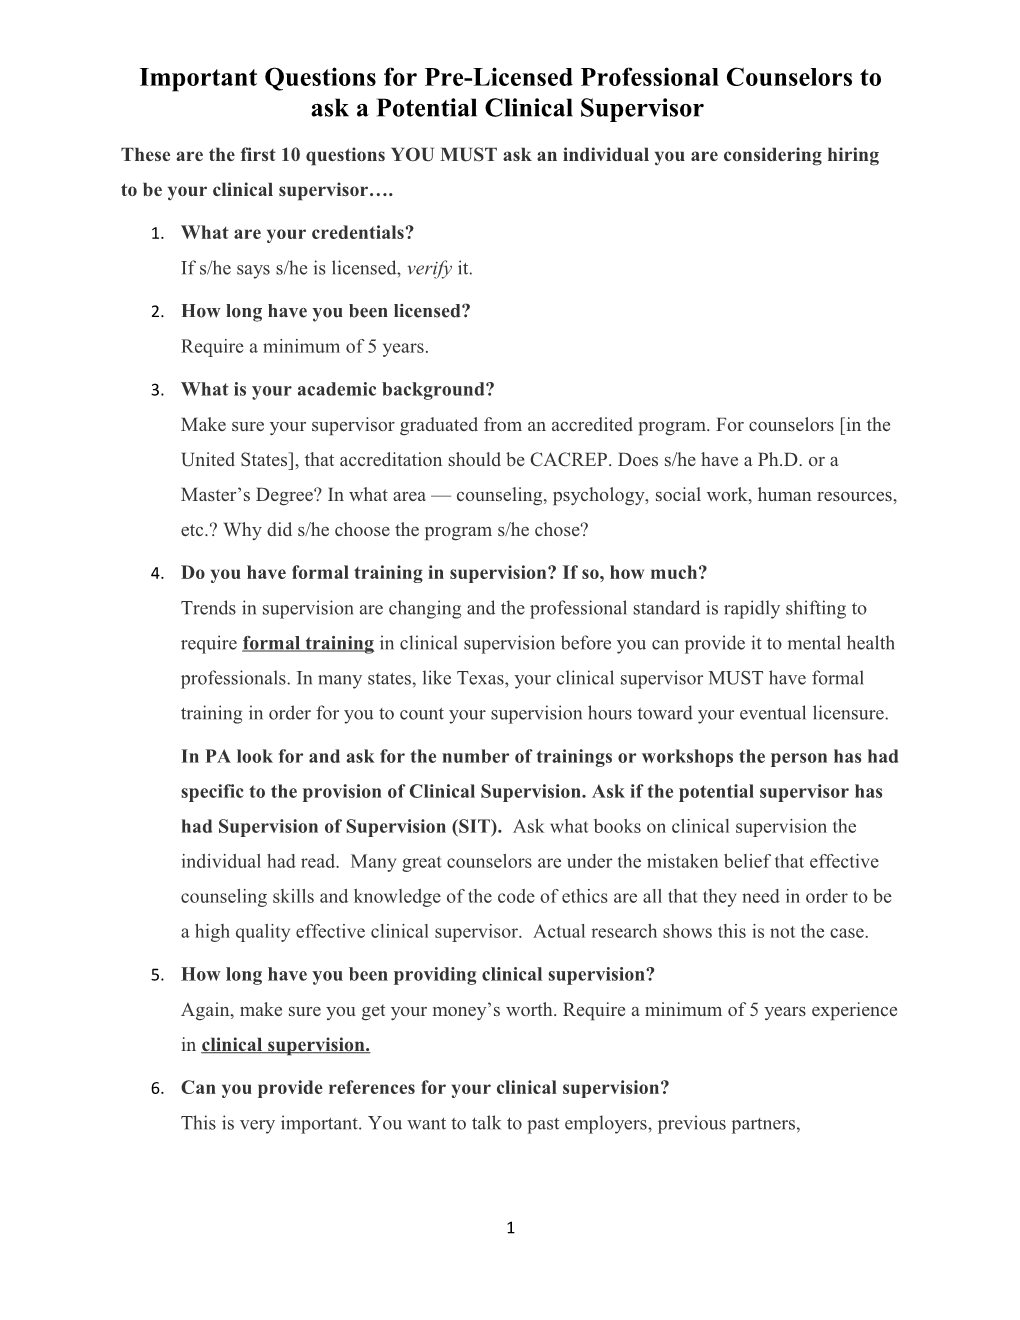 Important Questions for Pre-Licensed Professional Counselors to Ask a Potential Clinical